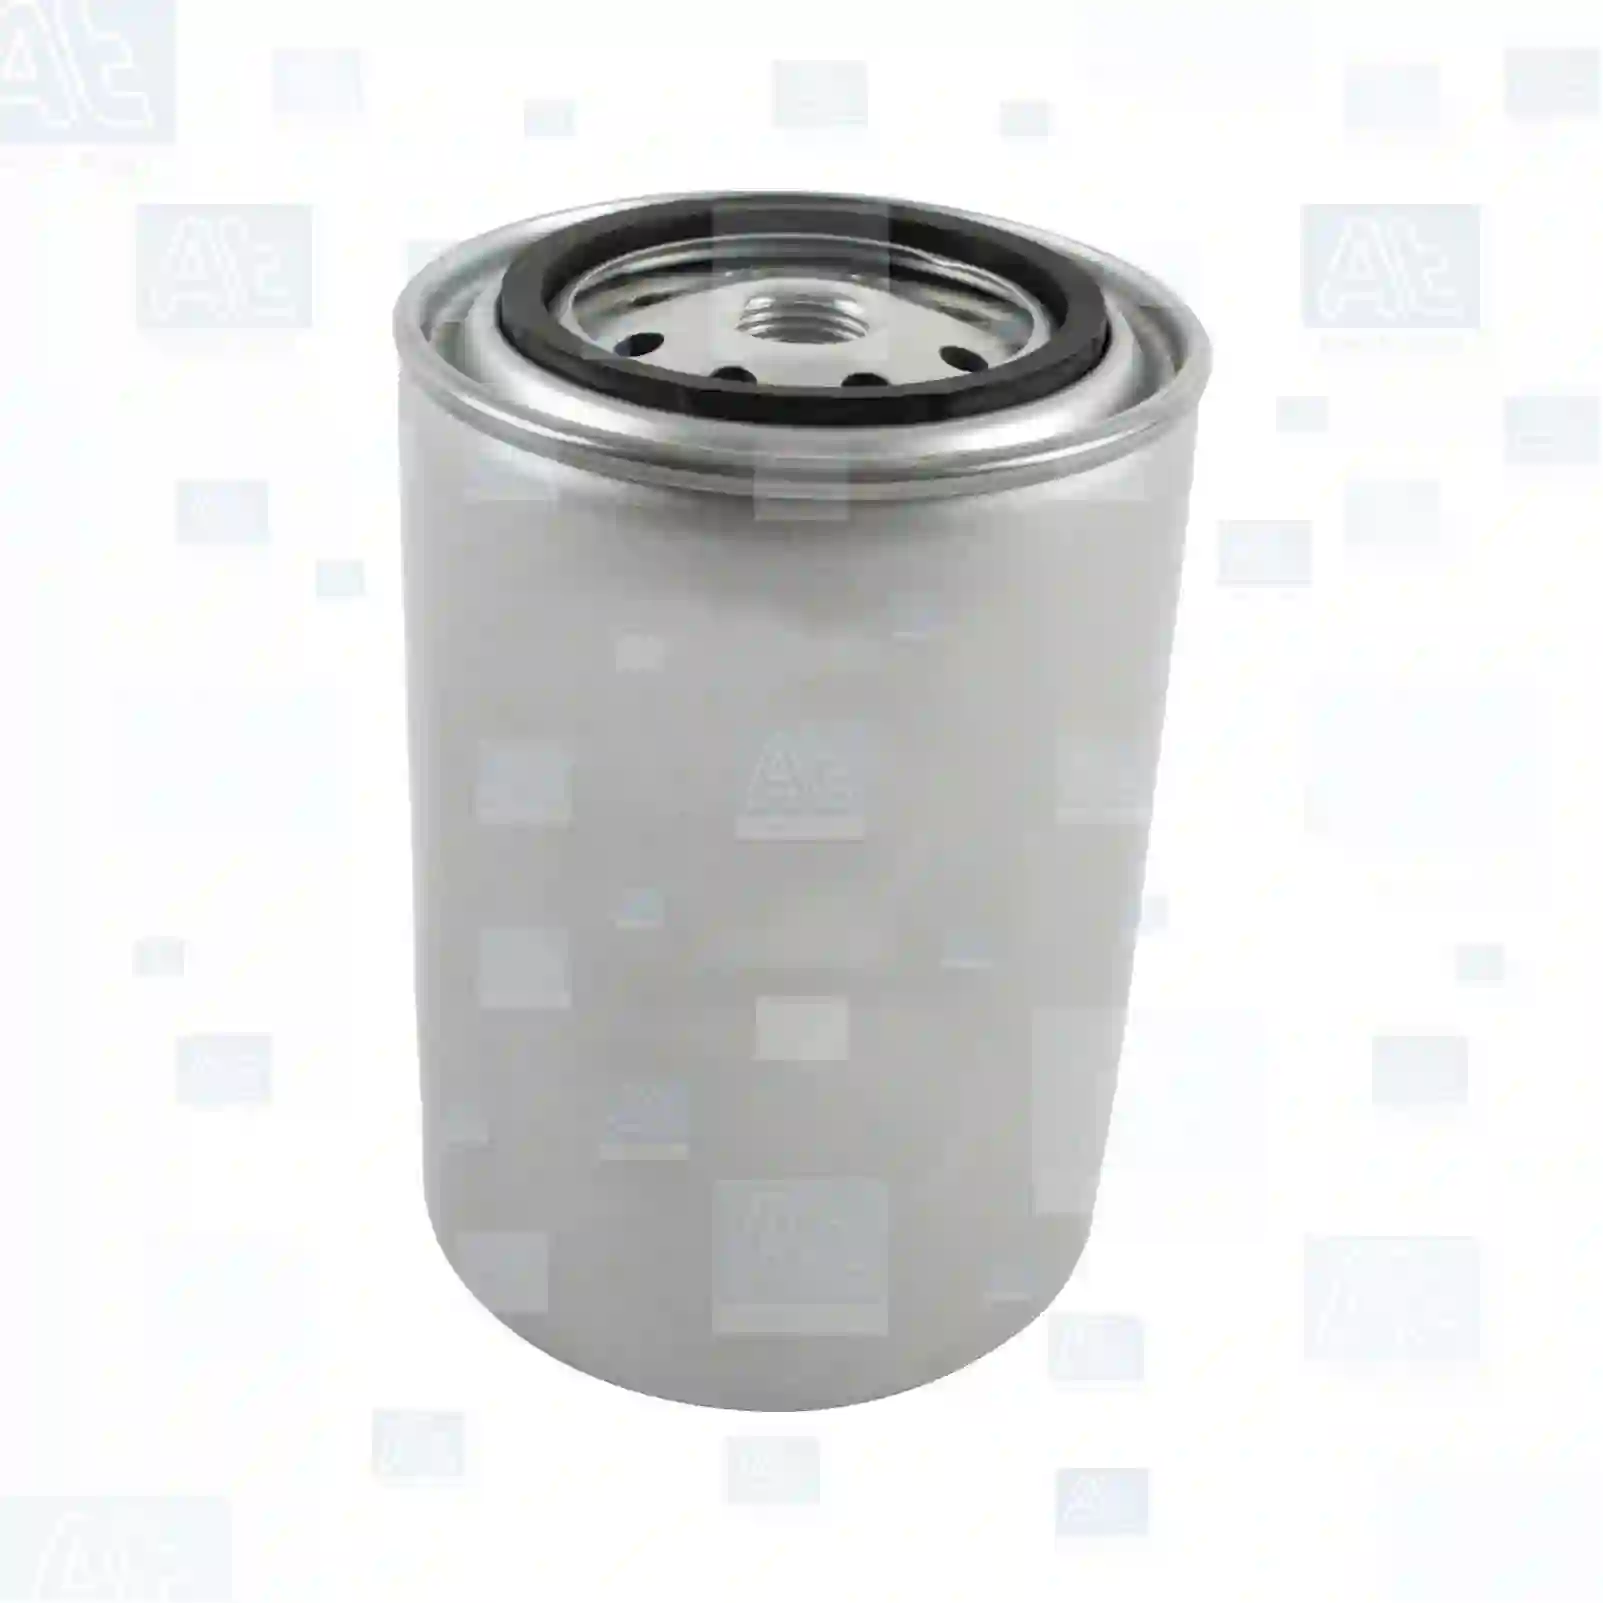 Coolant filter, 77707172, 40290892, 4029099, 4029120, 4393505, 70697635, 00049268, 01901776, 1329039C1, 419572C1, 423870C1, 427713C1, 427717C1, 441365C1, 462816C1, 993445C1, A151931, 9N-3368, 9N-3717, 9N-3719, 9Y-4529, 40599797, 4393504, 4681776, 70697635, 74029120, 209604, 254788, 254797, 259453, 290083, 290084, 298080, 299080, 299082, 299084, 299880, 3304879, 3310752, 3315789, 13692, 1355382, C299080, C3305367, C33055367, C3305567, C3314521, C3315789, 4786765, 00049268, 01851101, 01907694, 01930549, 03648966, 04029084, 04734562, 70697135, 70697635, 74029089, 74029120, 74059979, 74393505, 74681776, 74734562, 76106535, Y02229203, Y02729203, Y05774308, 1602113, 9843662, DNP554071, DNP554744, 12490162, 23507545, 23508425, 6438919, 6438920, 6439692, 6439766, 6438919, 6438920, 6439692, 01901776, 01930549, 04734562, 04739628, 1901776, 1930549, 4734562, 70029126, 70679635, 74029089, 74393505, AR87113, AR87114, AR89380, K251C271, K251C272, K251C342, KW2010, KW2051, 5602719, 7361501, 7361502, IN7361501, 2191P554071, 25MF214, 25MF214A, 25MF214P2, 1055916M1, 21915-95000, 0512185, PB2051, PM2051, V1350570, V1350579, 5000808721, 5001004324, OE46264, OF46264, 299080, 661302, 1696300311, 0120390456, 2191595000, 2191599032, 4054555, 12002929, 129680286, 200973329, 3130940, 3130941, 366822, 4099799, 79250031, 8390135, 027073723, 027073724, 027074037, 027074038, 027077520, 200973329, 207015003, 2070150030, 27073723, 27073724, 27074037, 27074038, 27074039, 7073724, 7074037, 7090917 ||  77707172 At Spare Part | Engine, Accelerator Pedal, Camshaft, Connecting Rod, Crankcase, Crankshaft, Cylinder Head, Engine Suspension Mountings, Exhaust Manifold, Exhaust Gas Recirculation, Filter Kits, Flywheel Housing, General Overhaul Kits, Engine, Intake Manifold, Oil Cleaner, Oil Cooler, Oil Filter, Oil Pump, Oil Sump, Piston & Liner, Sensor & Switch, Timing Case, Turbocharger, Cooling System, Belt Tensioner, Coolant Filter, Coolant Pipe, Corrosion Prevention Agent, Drive, Expansion Tank, Fan, Intercooler, Monitors & Gauges, Radiator, Thermostat, V-Belt / Timing belt, Water Pump, Fuel System, Electronical Injector Unit, Feed Pump, Fuel Filter, cpl., Fuel Gauge Sender,  Fuel Line, Fuel Pump, Fuel Tank, Injection Line Kit, Injection Pump, Exhaust System, Clutch & Pedal, Gearbox, Propeller Shaft, Axles, Brake System, Hubs & Wheels, Suspension, Leaf Spring, Universal Parts / Accessories, Steering, Electrical System, Cabin Coolant filter, 77707172, 40290892, 4029099, 4029120, 4393505, 70697635, 00049268, 01901776, 1329039C1, 419572C1, 423870C1, 427713C1, 427717C1, 441365C1, 462816C1, 993445C1, A151931, 9N-3368, 9N-3717, 9N-3719, 9Y-4529, 40599797, 4393504, 4681776, 70697635, 74029120, 209604, 254788, 254797, 259453, 290083, 290084, 298080, 299080, 299082, 299084, 299880, 3304879, 3310752, 3315789, 13692, 1355382, C299080, C3305367, C33055367, C3305567, C3314521, C3315789, 4786765, 00049268, 01851101, 01907694, 01930549, 03648966, 04029084, 04734562, 70697135, 70697635, 74029089, 74029120, 74059979, 74393505, 74681776, 74734562, 76106535, Y02229203, Y02729203, Y05774308, 1602113, 9843662, DNP554071, DNP554744, 12490162, 23507545, 23508425, 6438919, 6438920, 6439692, 6439766, 6438919, 6438920, 6439692, 01901776, 01930549, 04734562, 04739628, 1901776, 1930549, 4734562, 70029126, 70679635, 74029089, 74393505, AR87113, AR87114, AR89380, K251C271, K251C272, K251C342, KW2010, KW2051, 5602719, 7361501, 7361502, IN7361501, 2191P554071, 25MF214, 25MF214A, 25MF214P2, 1055916M1, 21915-95000, 0512185, PB2051, PM2051, V1350570, V1350579, 5000808721, 5001004324, OE46264, OF46264, 299080, 661302, 1696300311, 0120390456, 2191595000, 2191599032, 4054555, 12002929, 129680286, 200973329, 3130940, 3130941, 366822, 4099799, 79250031, 8390135, 027073723, 027073724, 027074037, 027074038, 027077520, 200973329, 207015003, 2070150030, 27073723, 27073724, 27074037, 27074038, 27074039, 7073724, 7074037, 7090917 ||  77707172 At Spare Part | Engine, Accelerator Pedal, Camshaft, Connecting Rod, Crankcase, Crankshaft, Cylinder Head, Engine Suspension Mountings, Exhaust Manifold, Exhaust Gas Recirculation, Filter Kits, Flywheel Housing, General Overhaul Kits, Engine, Intake Manifold, Oil Cleaner, Oil Cooler, Oil Filter, Oil Pump, Oil Sump, Piston & Liner, Sensor & Switch, Timing Case, Turbocharger, Cooling System, Belt Tensioner, Coolant Filter, Coolant Pipe, Corrosion Prevention Agent, Drive, Expansion Tank, Fan, Intercooler, Monitors & Gauges, Radiator, Thermostat, V-Belt / Timing belt, Water Pump, Fuel System, Electronical Injector Unit, Feed Pump, Fuel Filter, cpl., Fuel Gauge Sender,  Fuel Line, Fuel Pump, Fuel Tank, Injection Line Kit, Injection Pump, Exhaust System, Clutch & Pedal, Gearbox, Propeller Shaft, Axles, Brake System, Hubs & Wheels, Suspension, Leaf Spring, Universal Parts / Accessories, Steering, Electrical System, Cabin